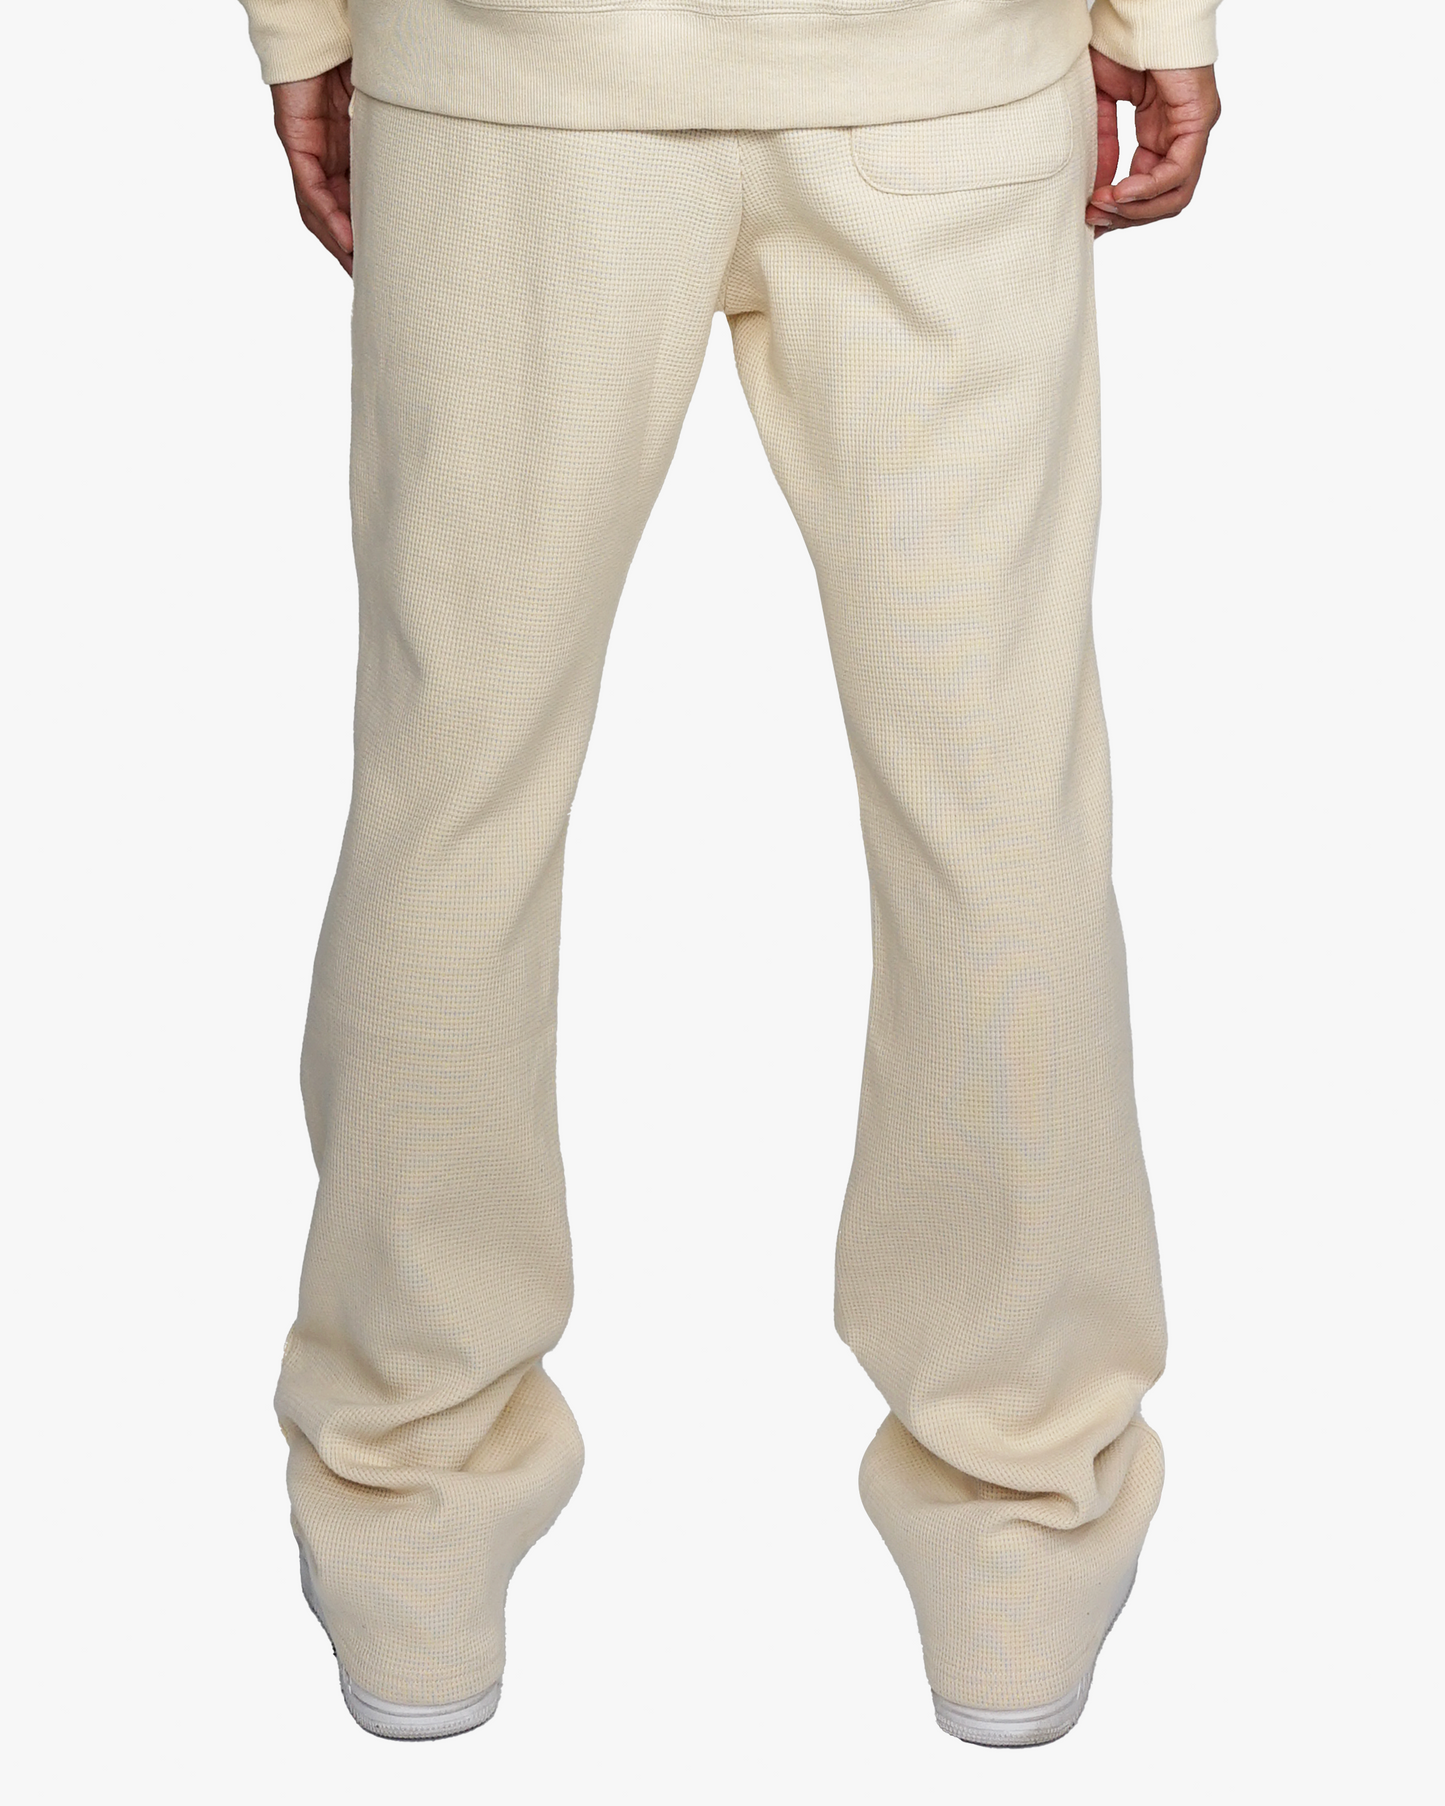 EPTM THERMAL FLARE PANTS-CREAM